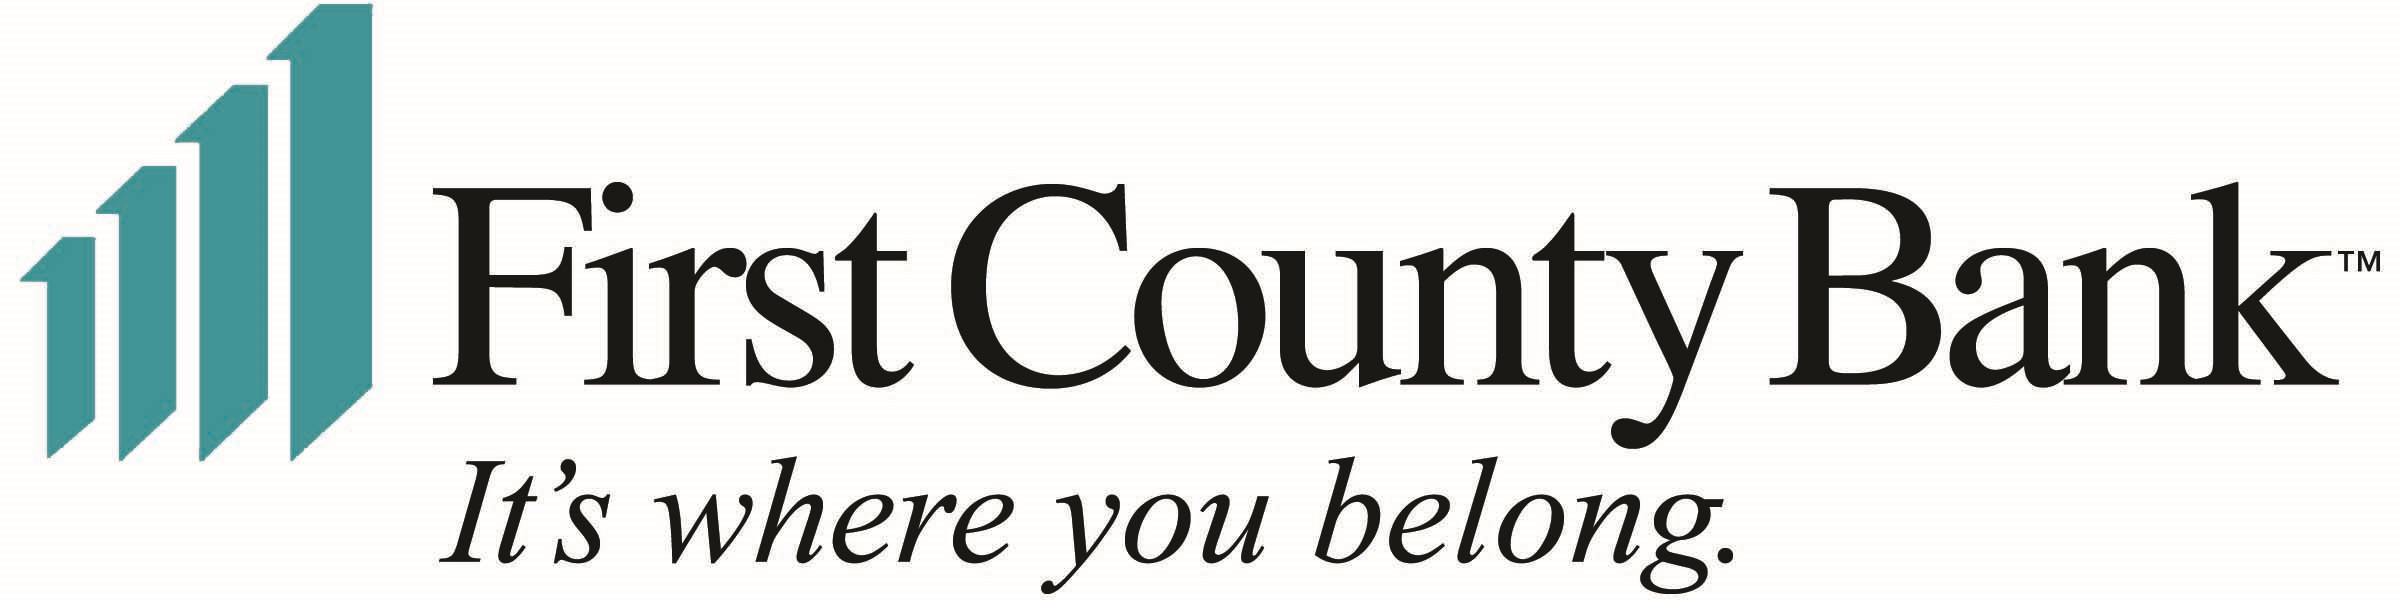 First County Bank logo